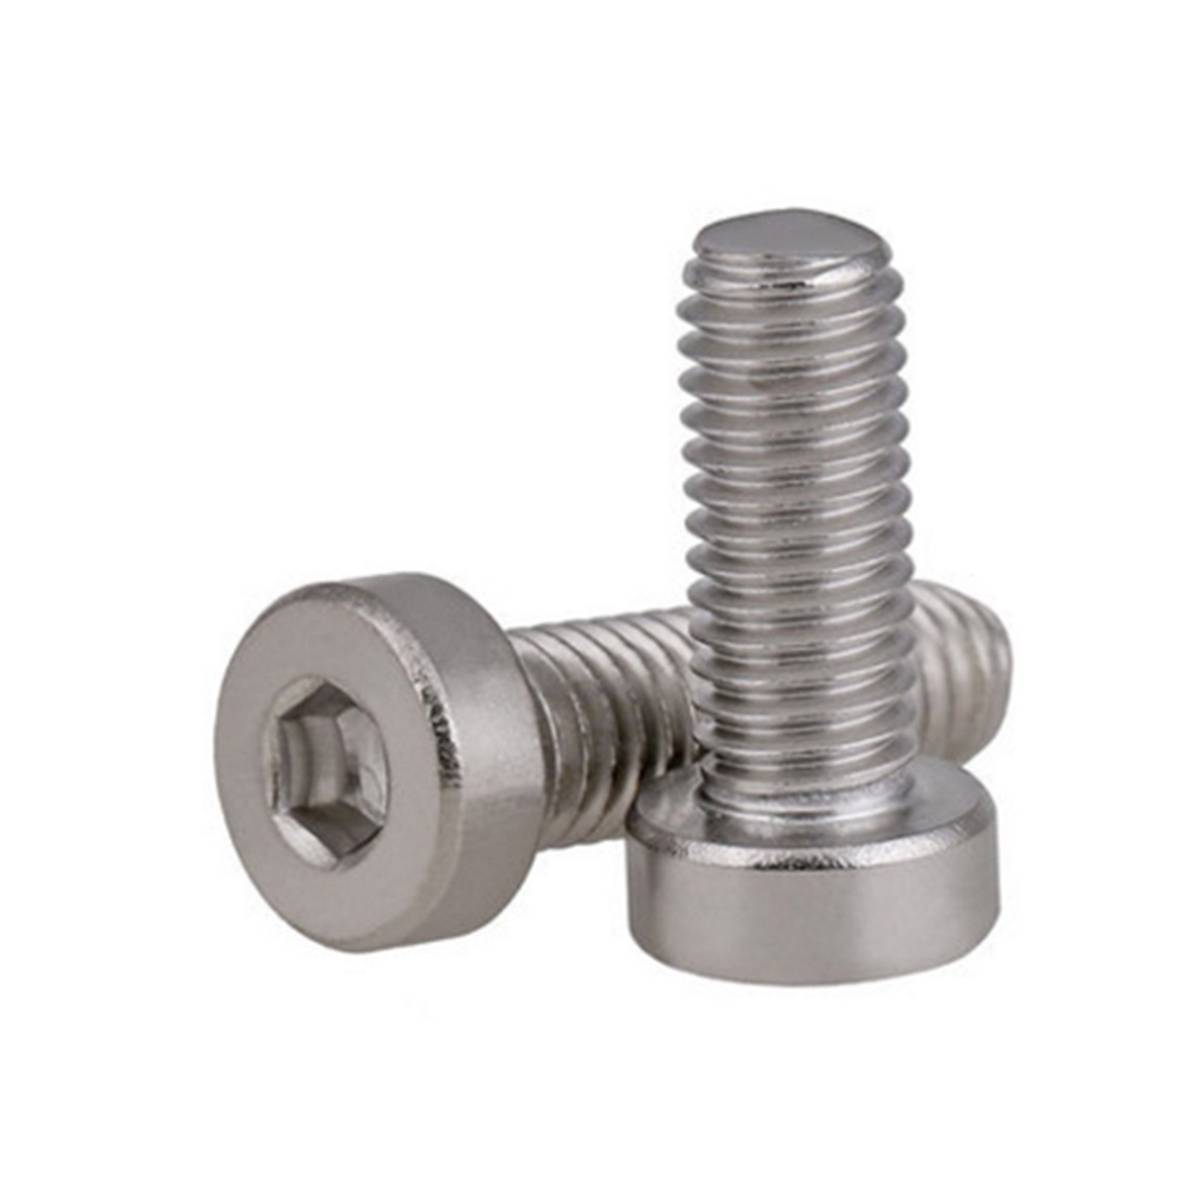 DIN 6912 Cap Bolts Thin Cylindrical Head • Steel (8.8, 10.9, 12.9) •  Stainless Steel